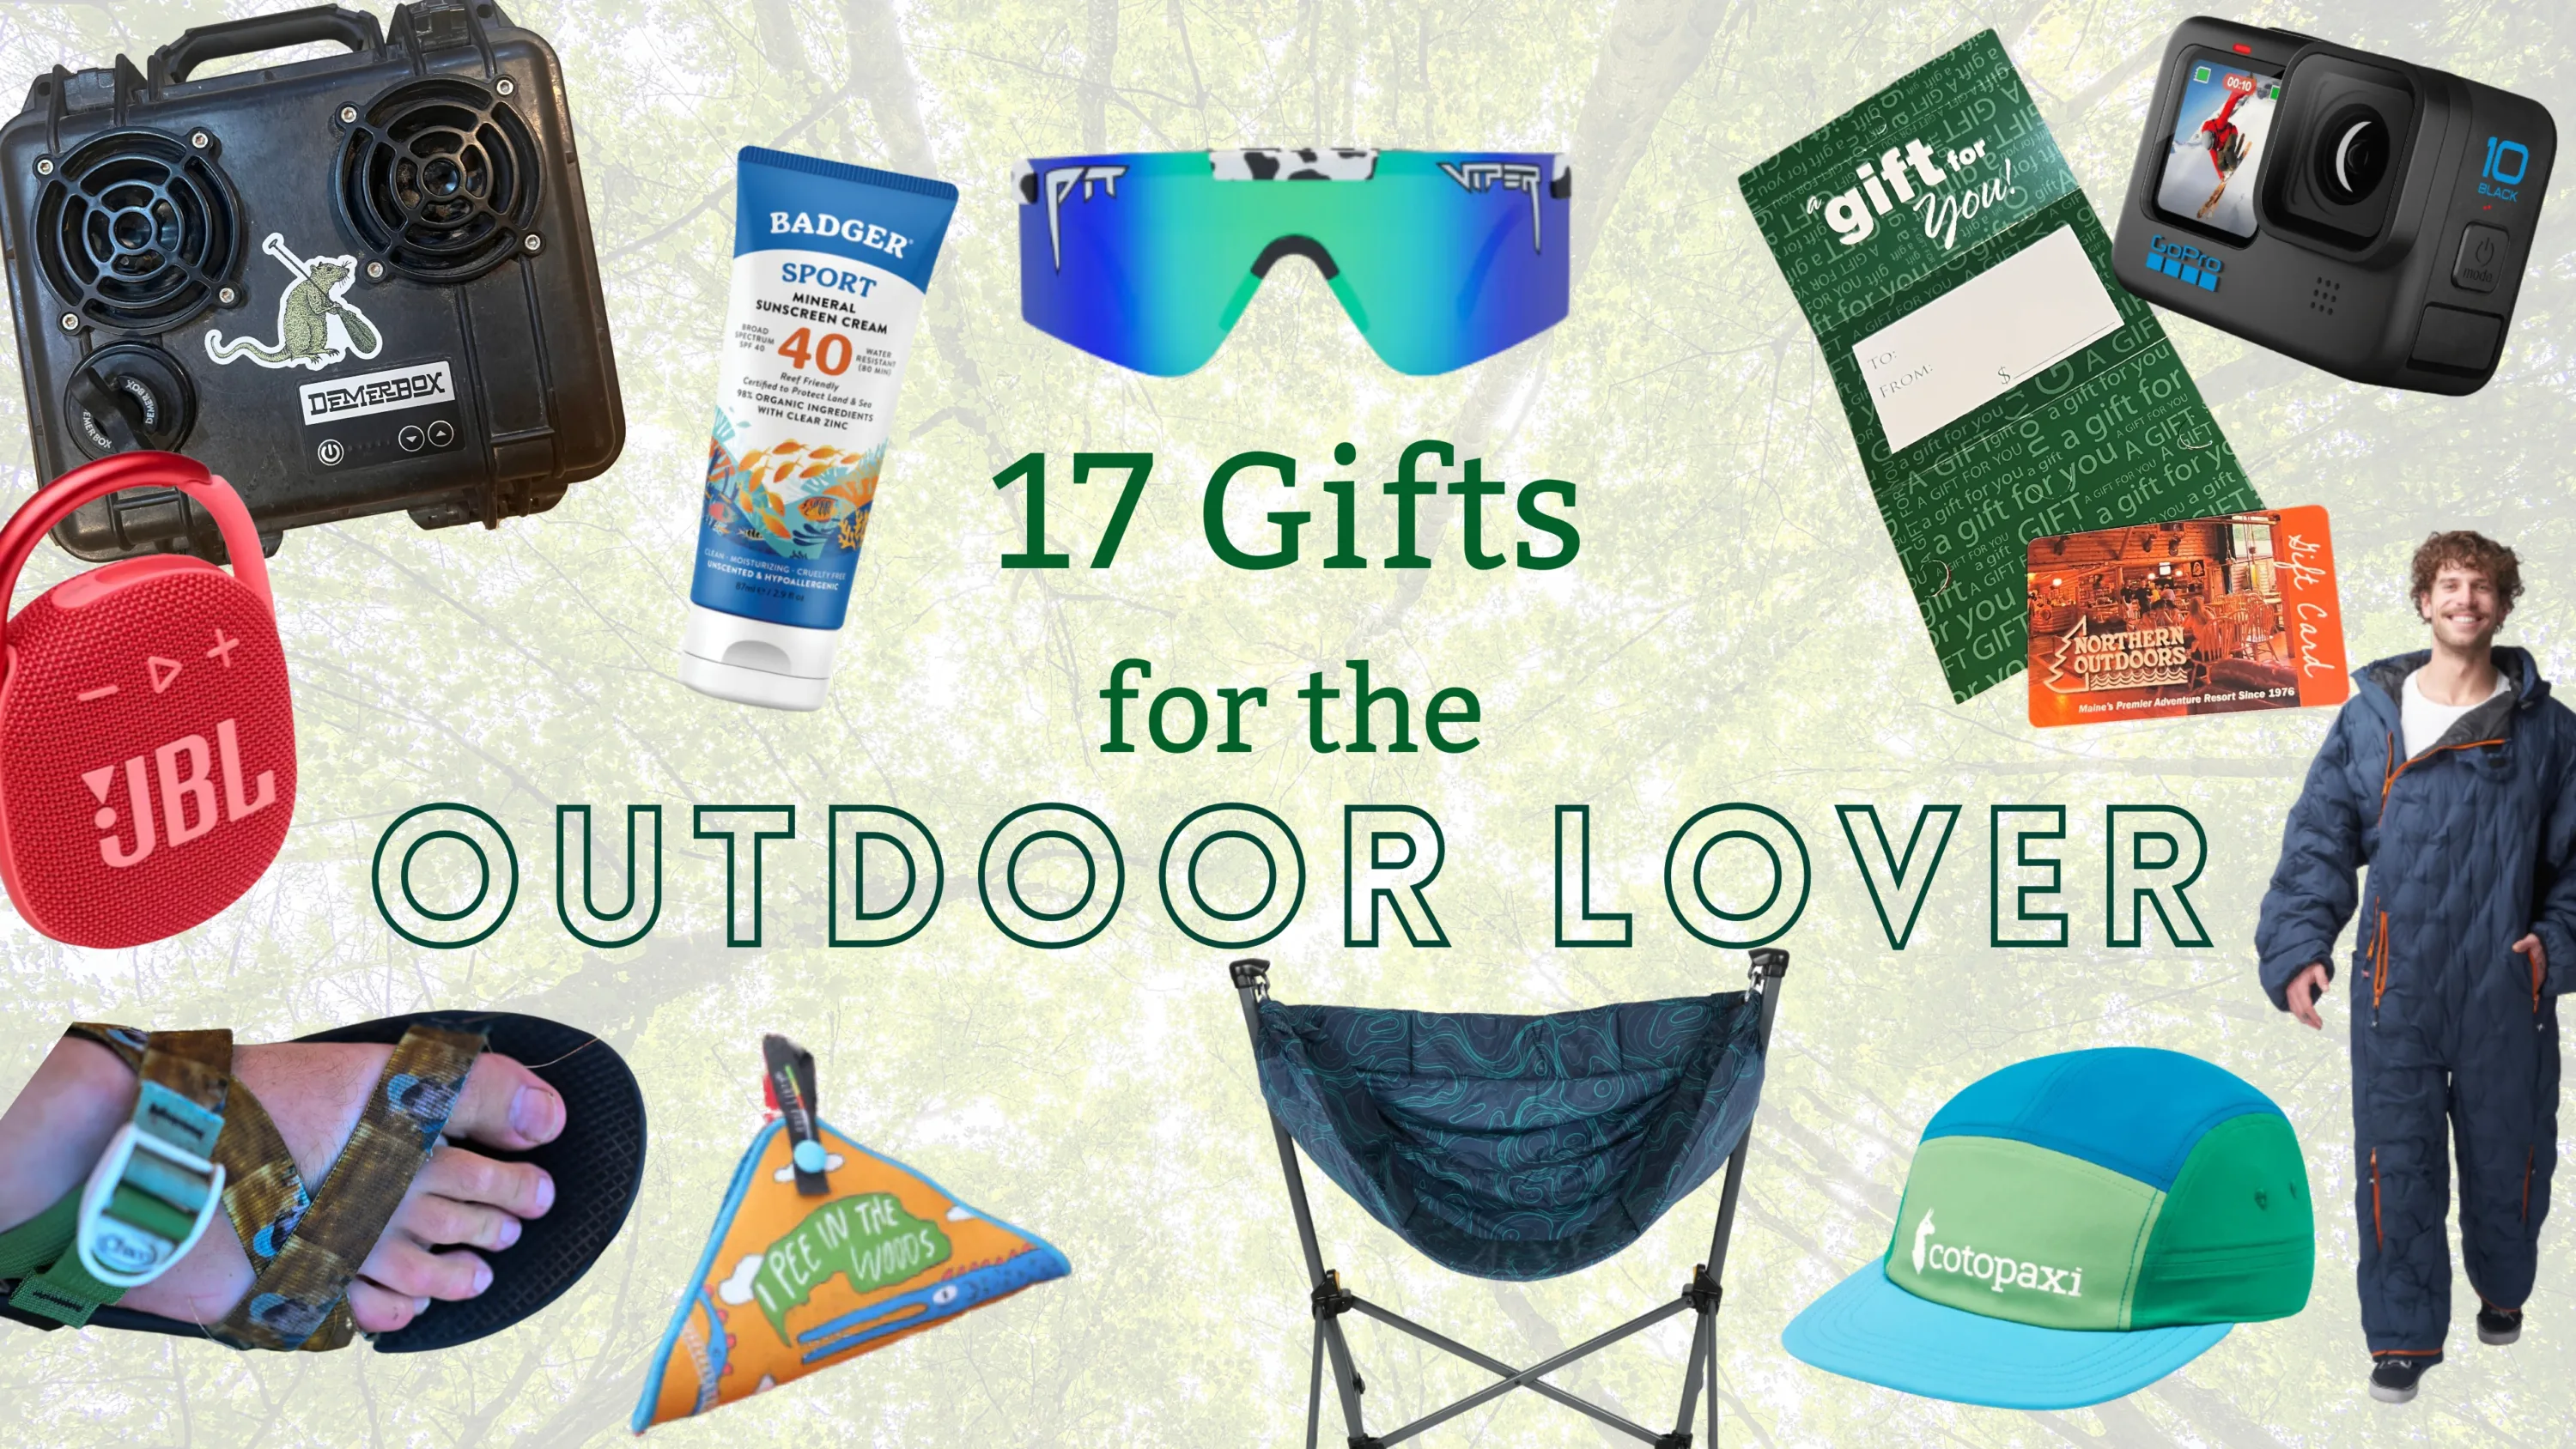 17 Gift Ideas for the Outdoor Lover - Northern Outdoors